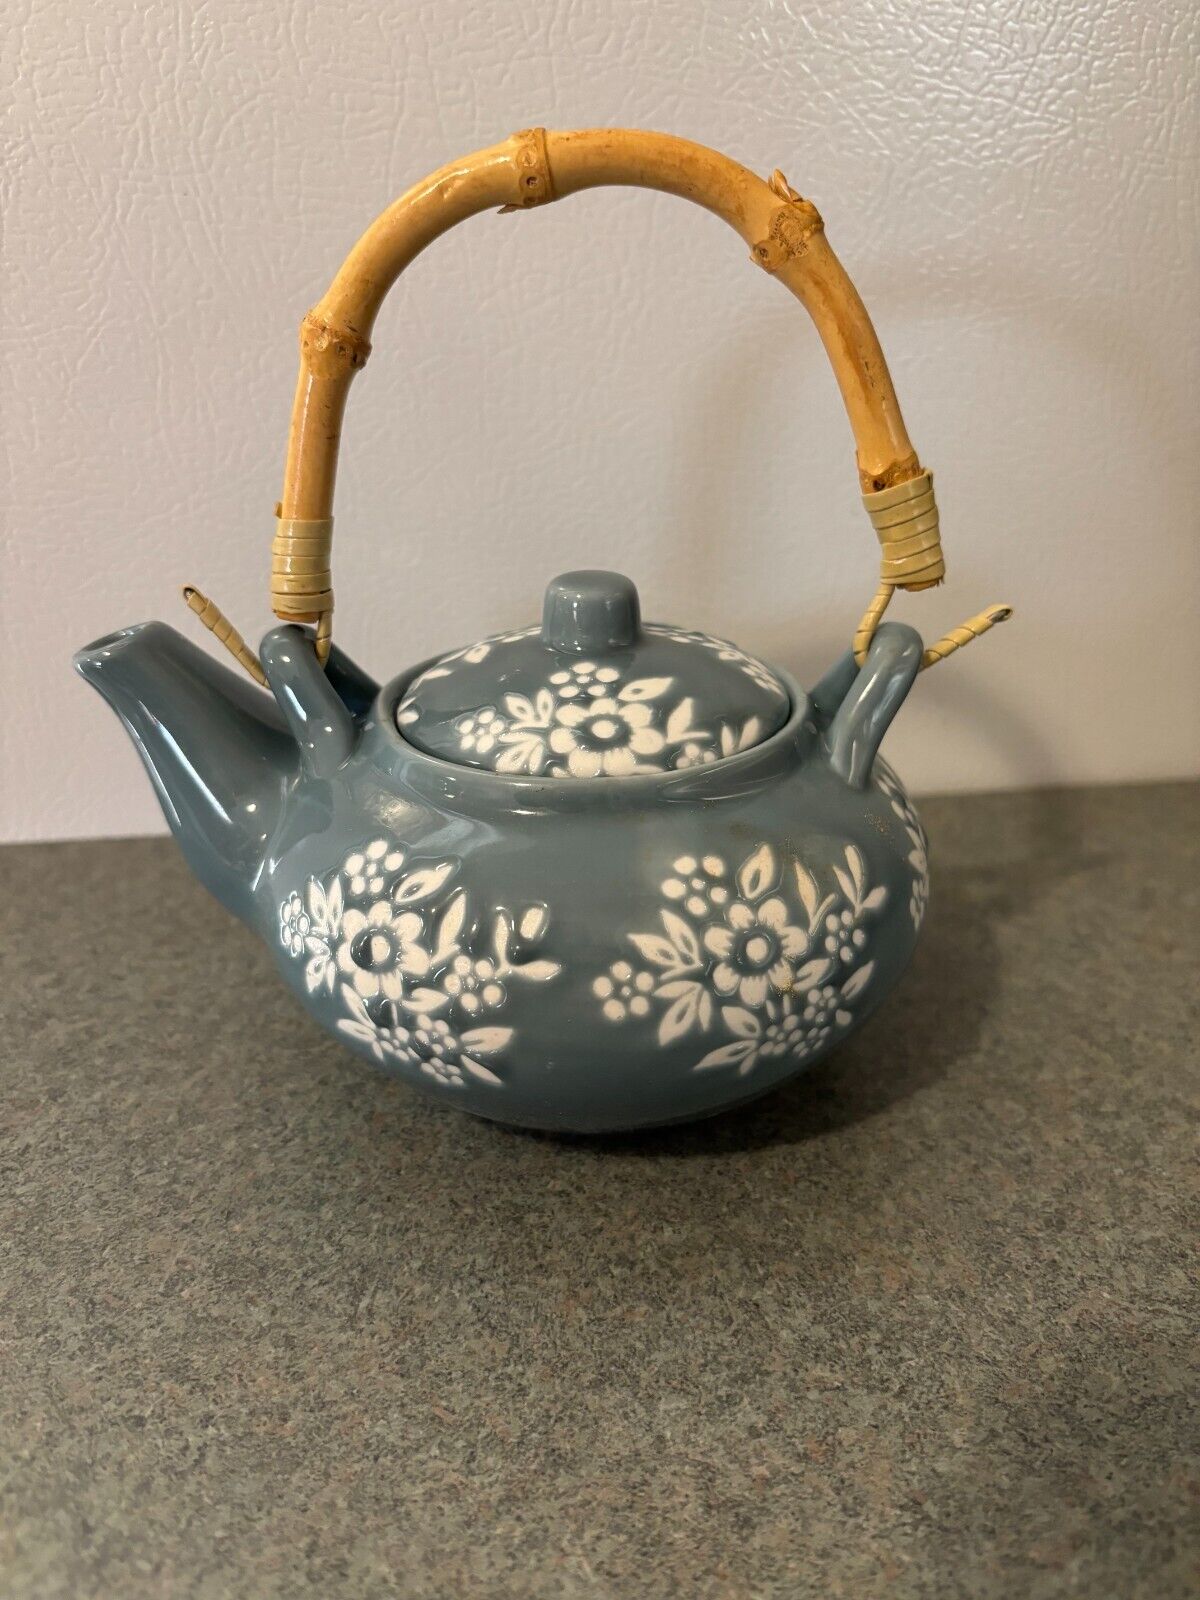 Vintage Blue Gray Teapot With Bamboo Handle Never Used Excellent Condition